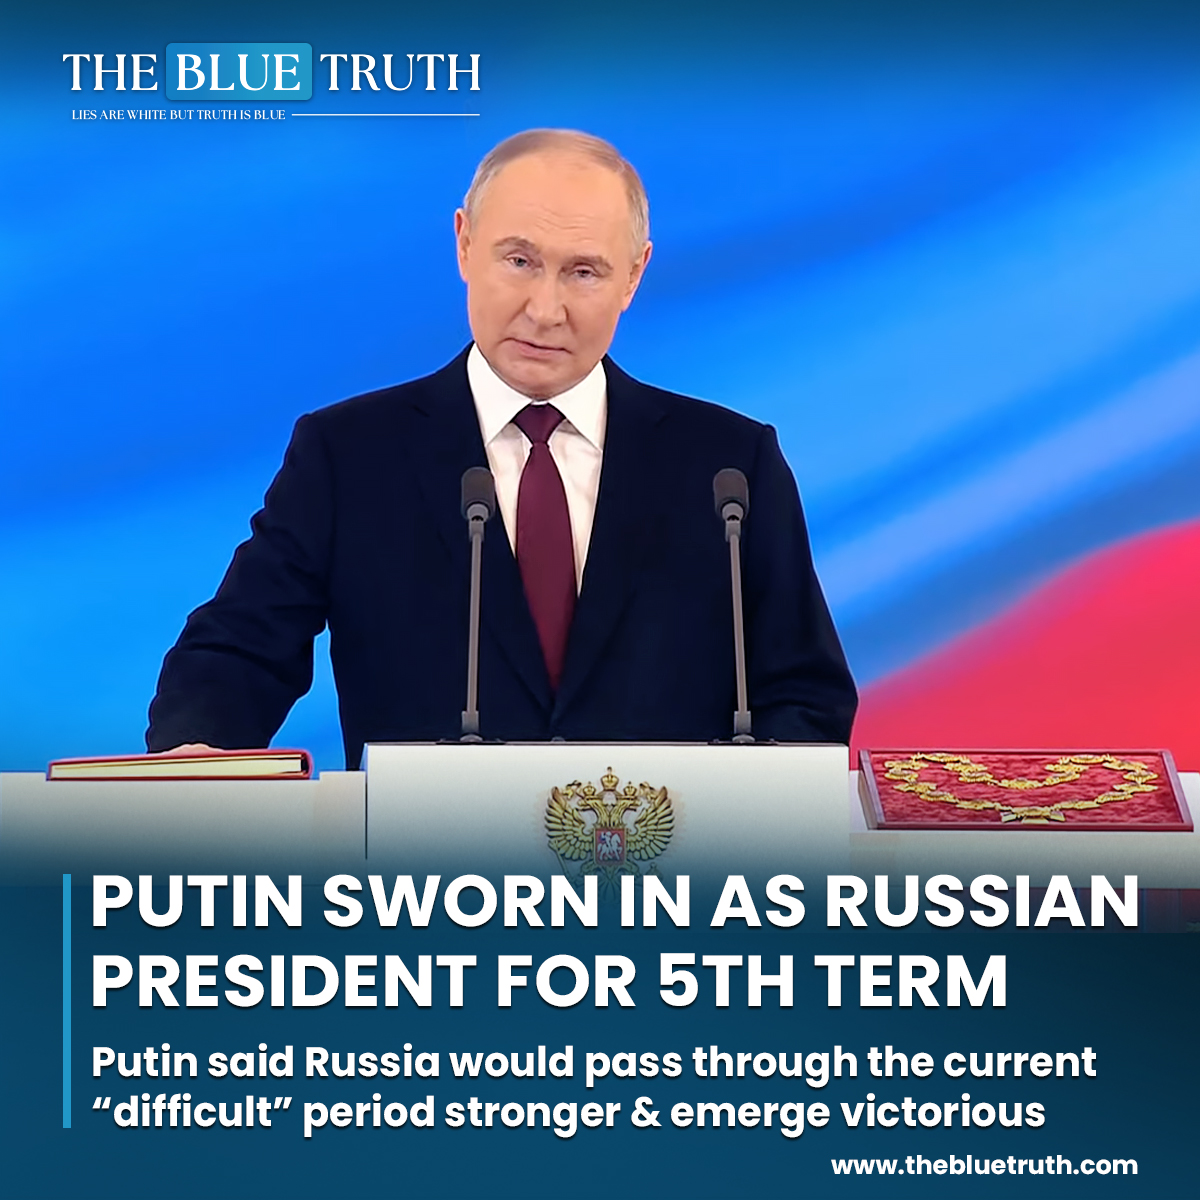 Putin said “We are a united and great nation, and together we will overcome all obstacles, realise everything we have planned, and together, we will win,” he said.
#VladimirPutin #RussianPolitics #Inauguration #UkraineConflict #WesternBoycott #tbt #TheBlueTruth